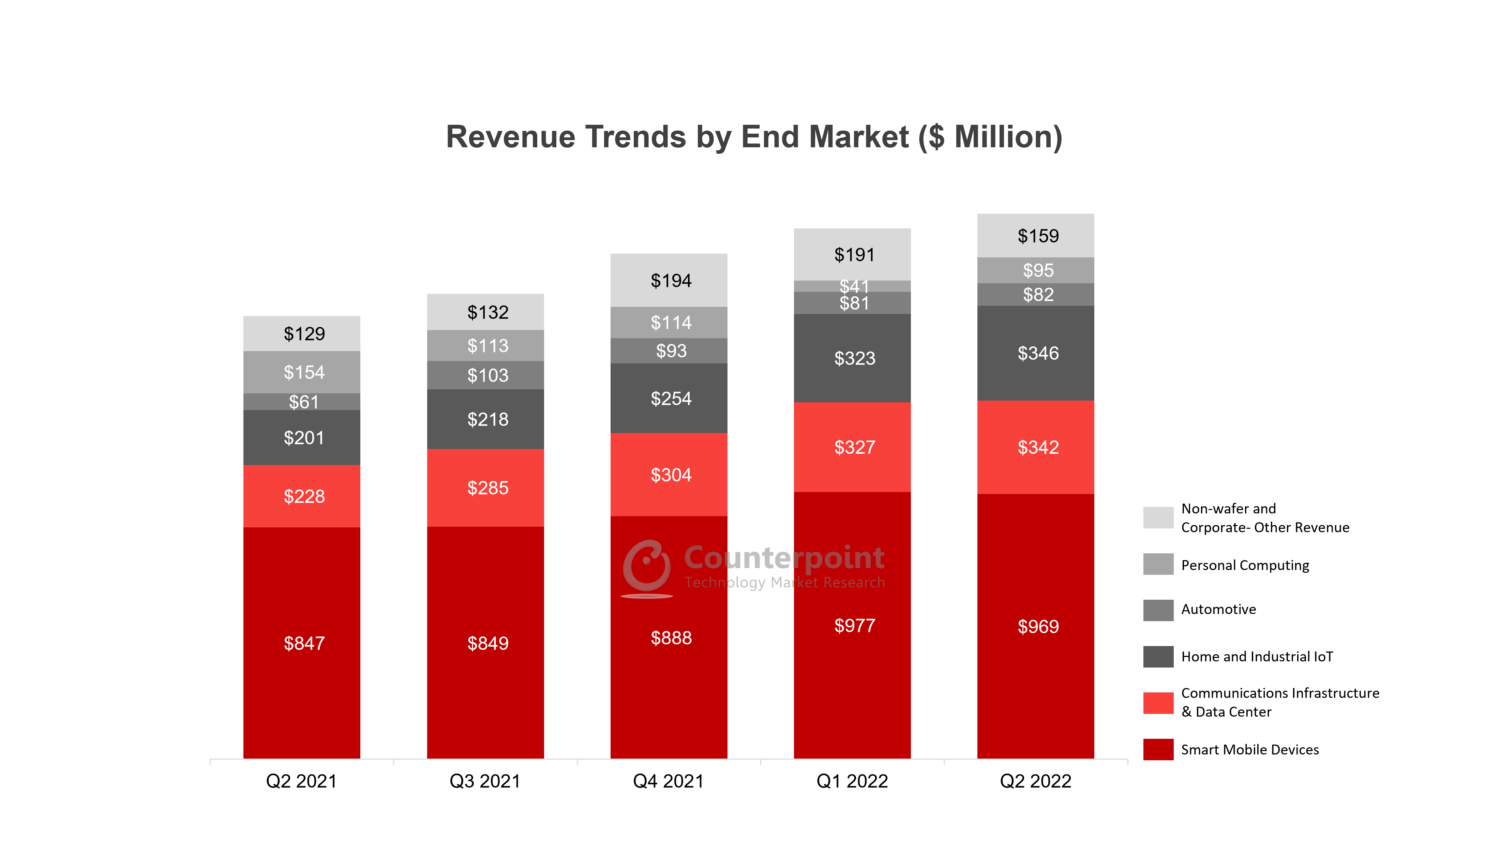 Counterpoint Research GlobalFoundries-Revenue Trends